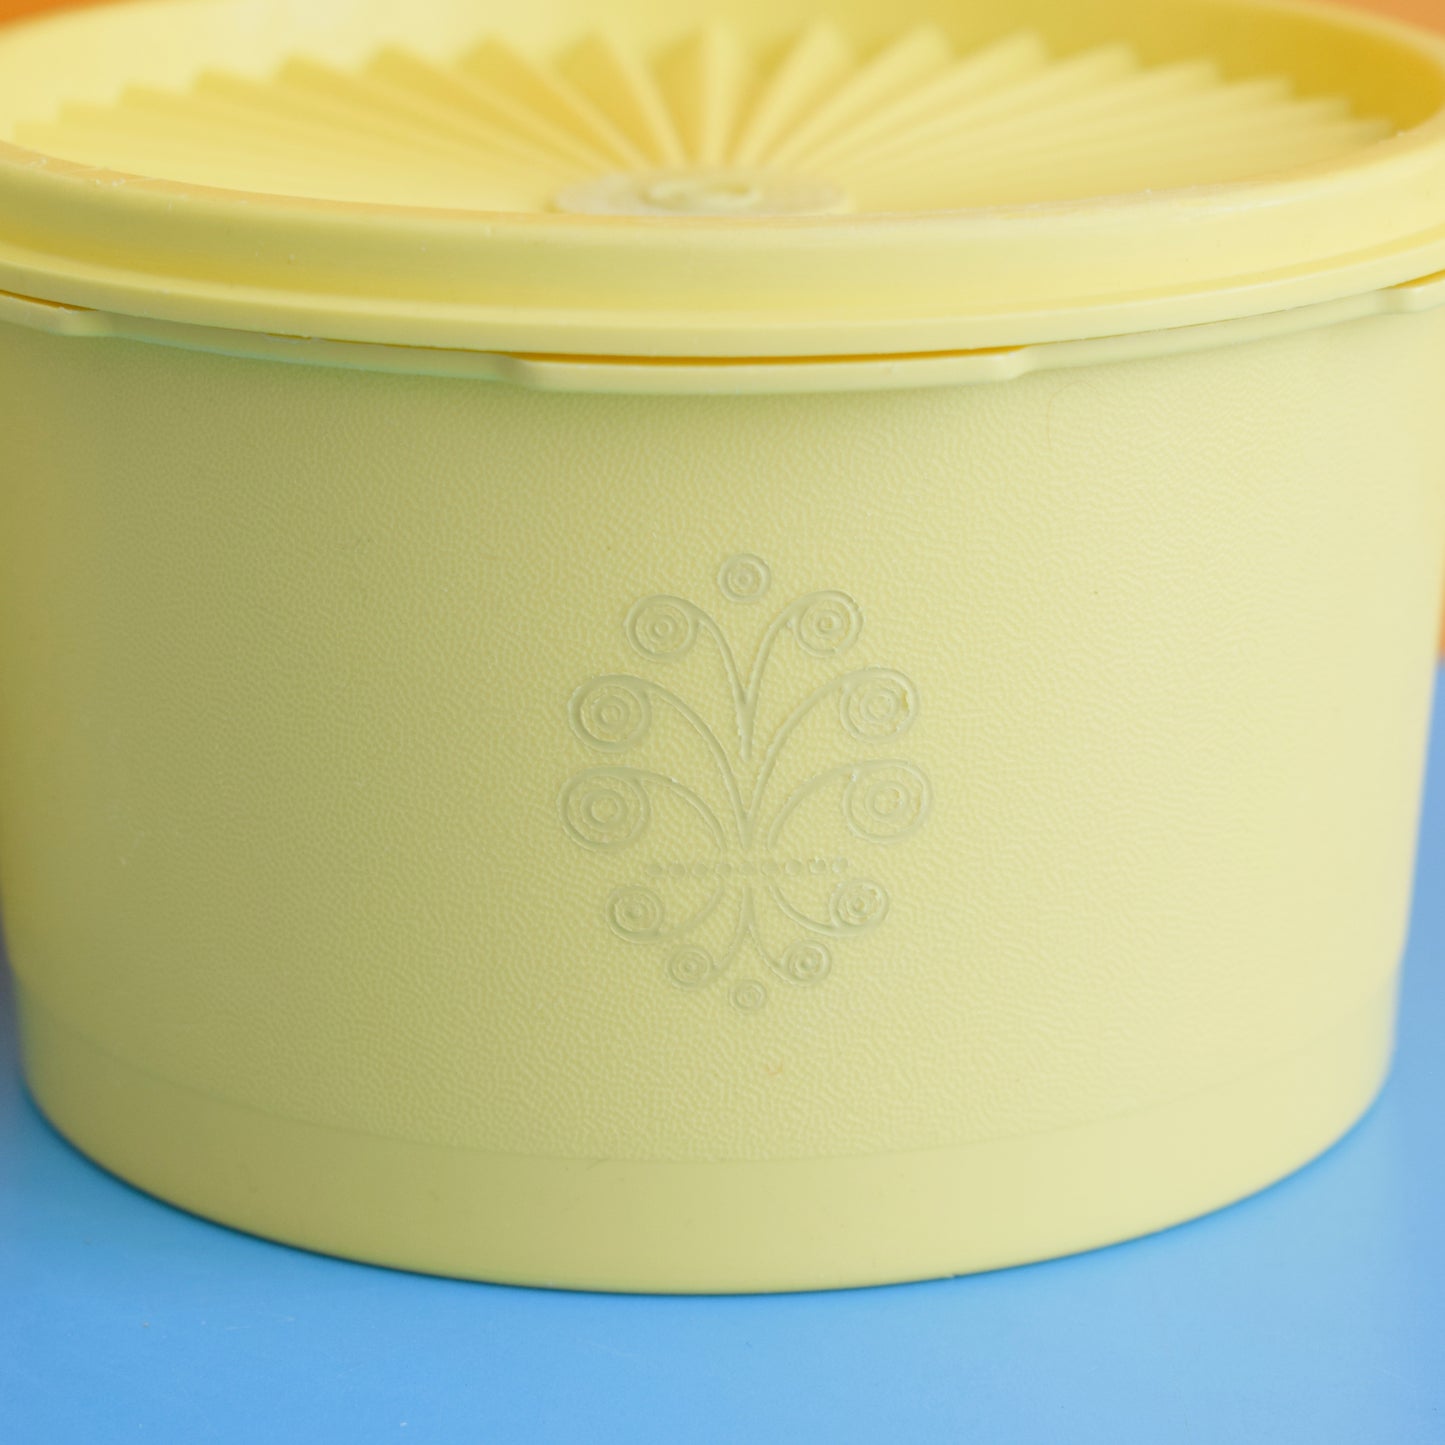 Vintage 1970s Tupperware Fan Top Containers - Yellow.